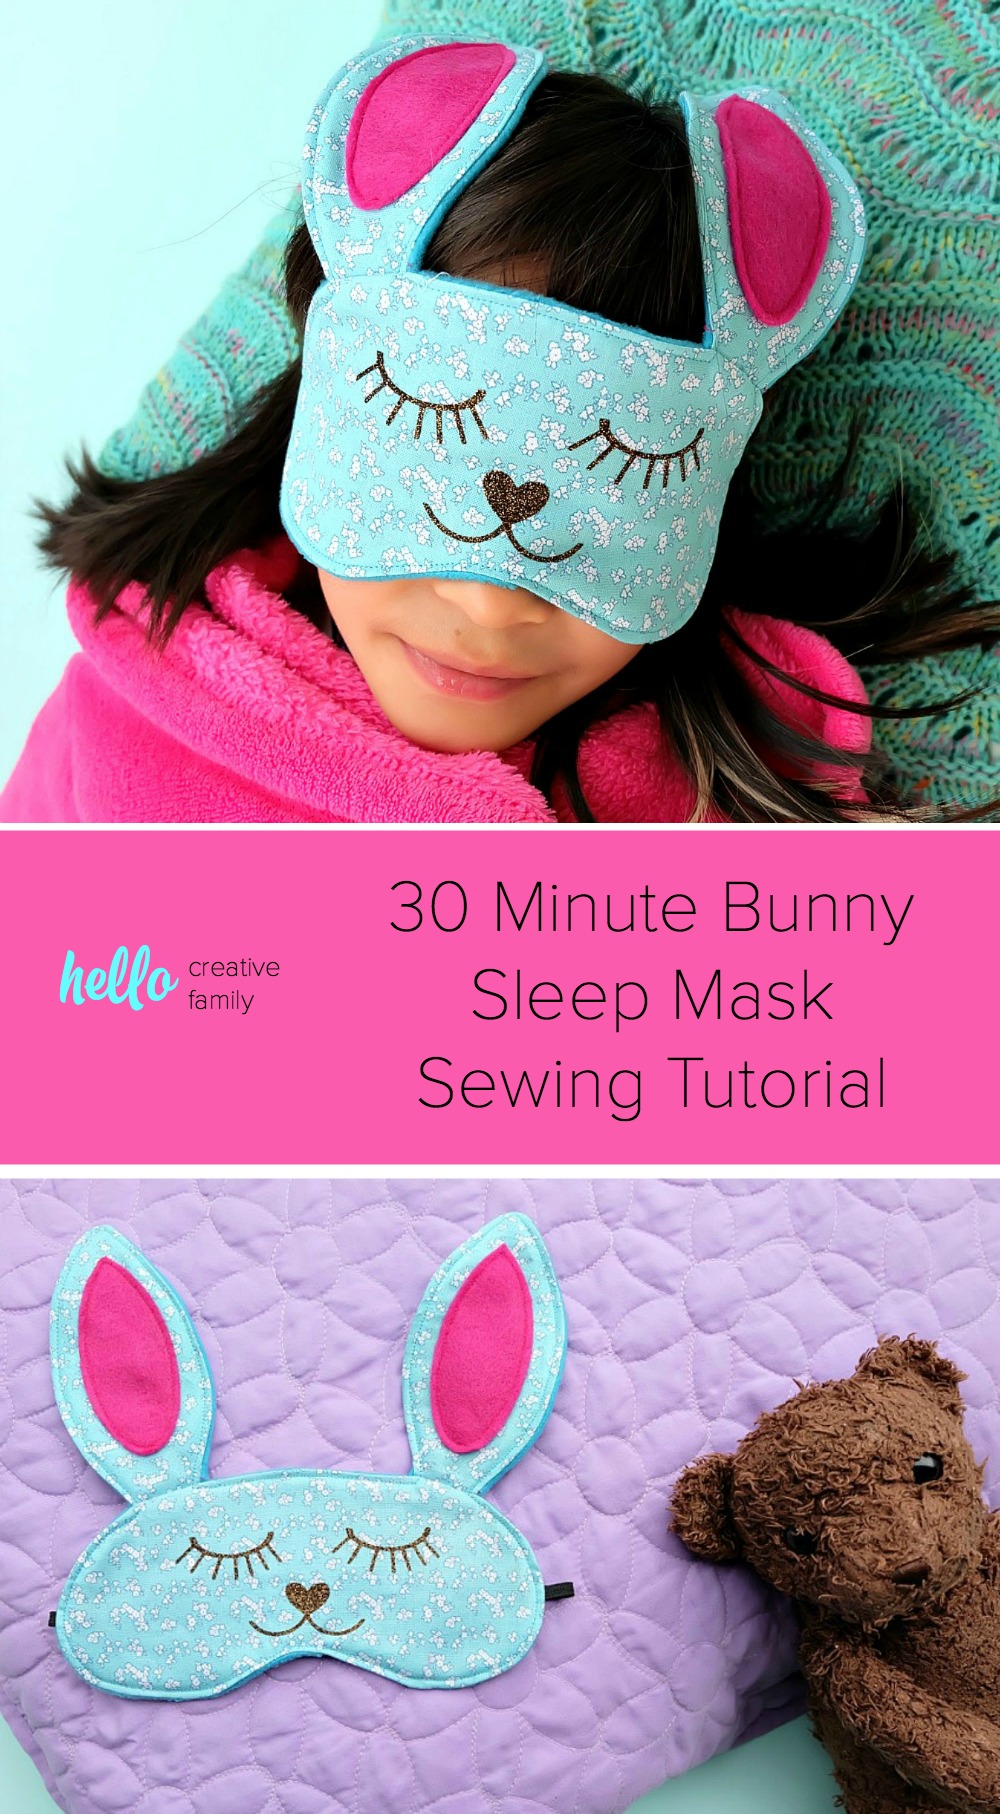 This 30 Minute Bunny Sleep Mask Sewing Tutorial is just about as cute as can be! Its easy to make and would make an adorable handmade gift idea for teens or tweens and would be perfect for birthday party or slumber party favors! Free cut file provided using the Cricut Maker or Cricut Explore. I have to make this Cricut project next! Step by step photos and instructions! #sponsored #CricutMade #CricutMaker